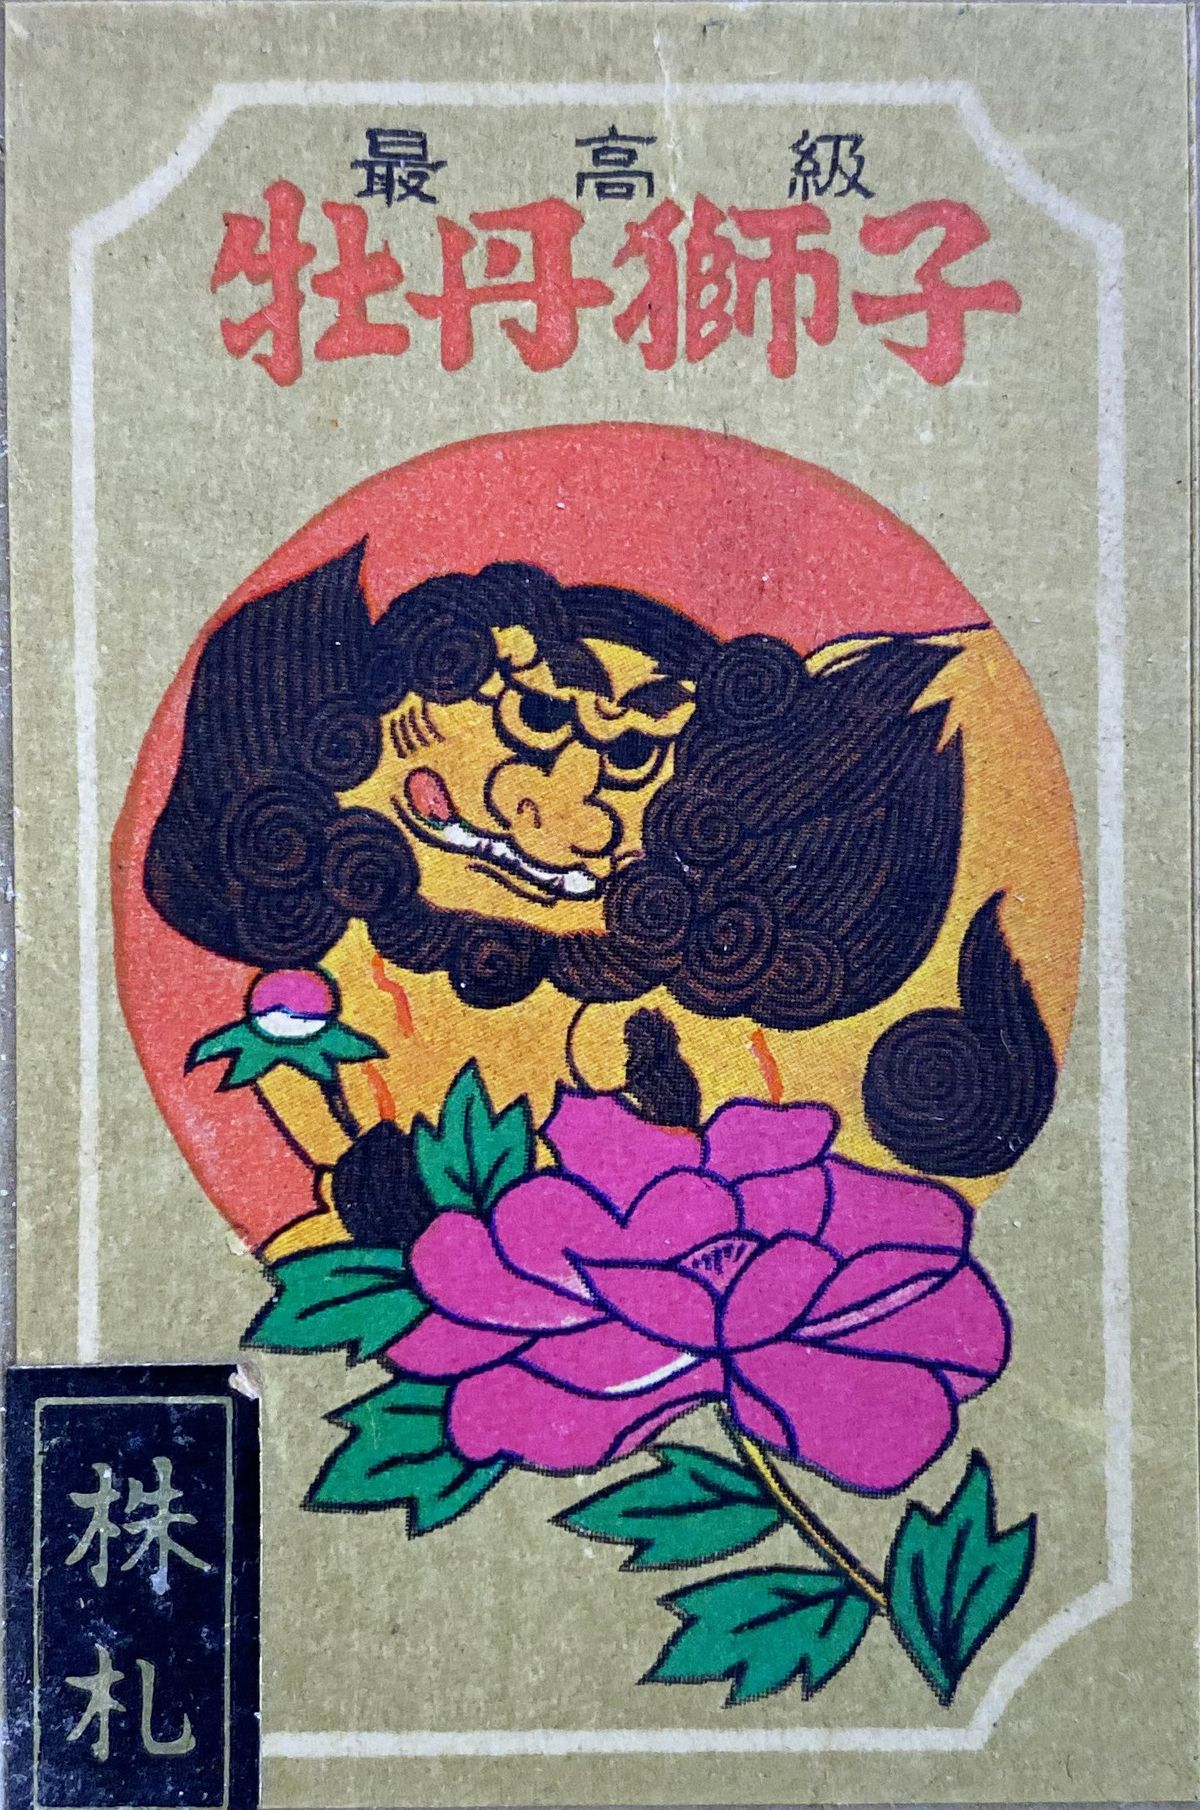 A hanafuda deck with an image of a stylized lion and peony flower.